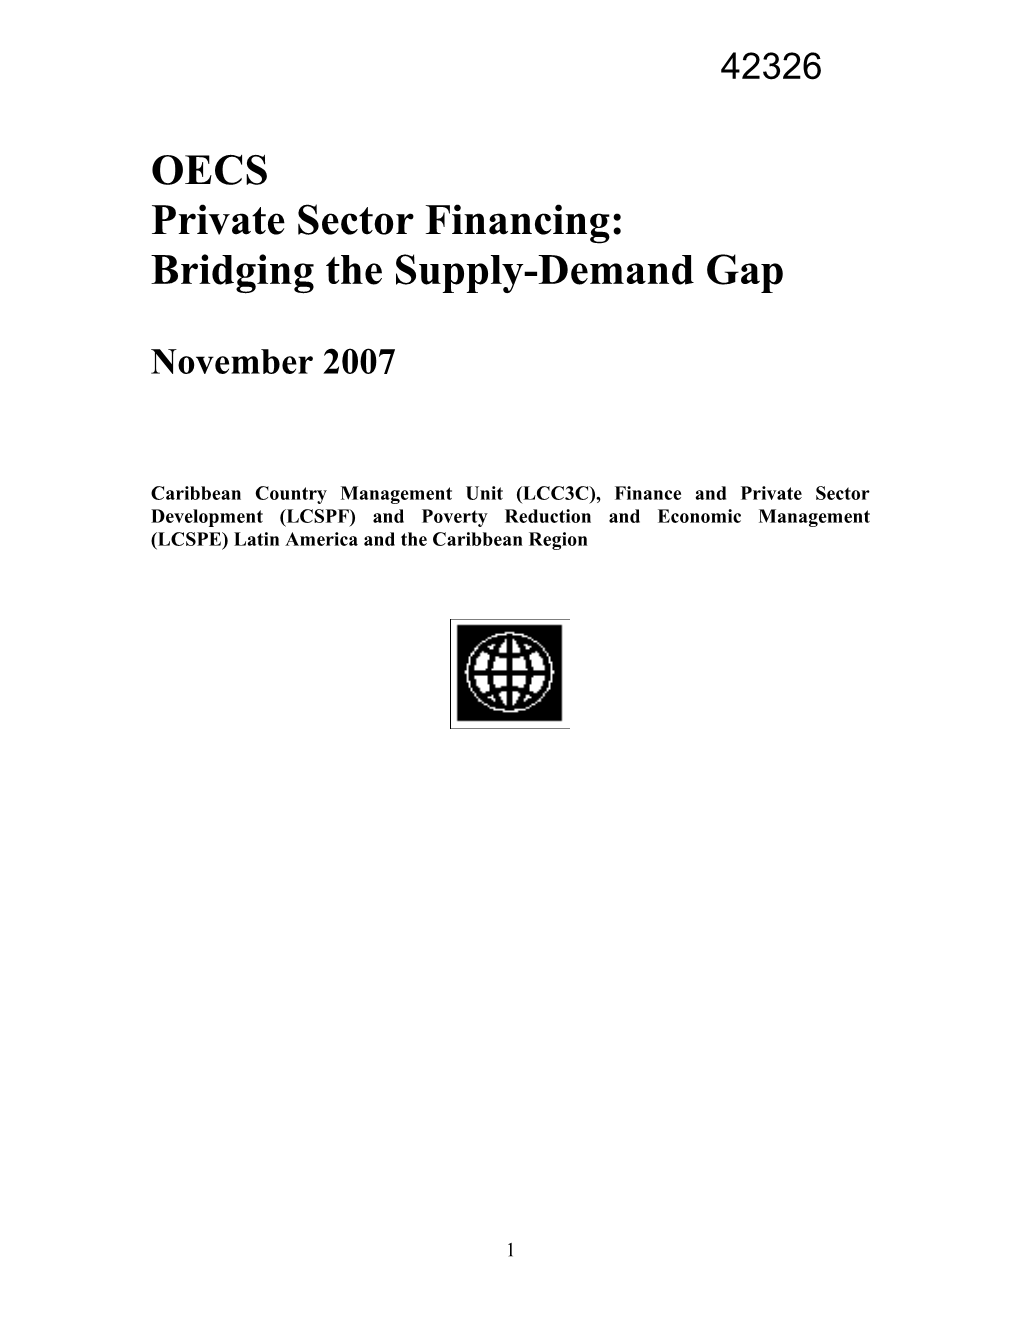 OECS Private Sector Financing Study